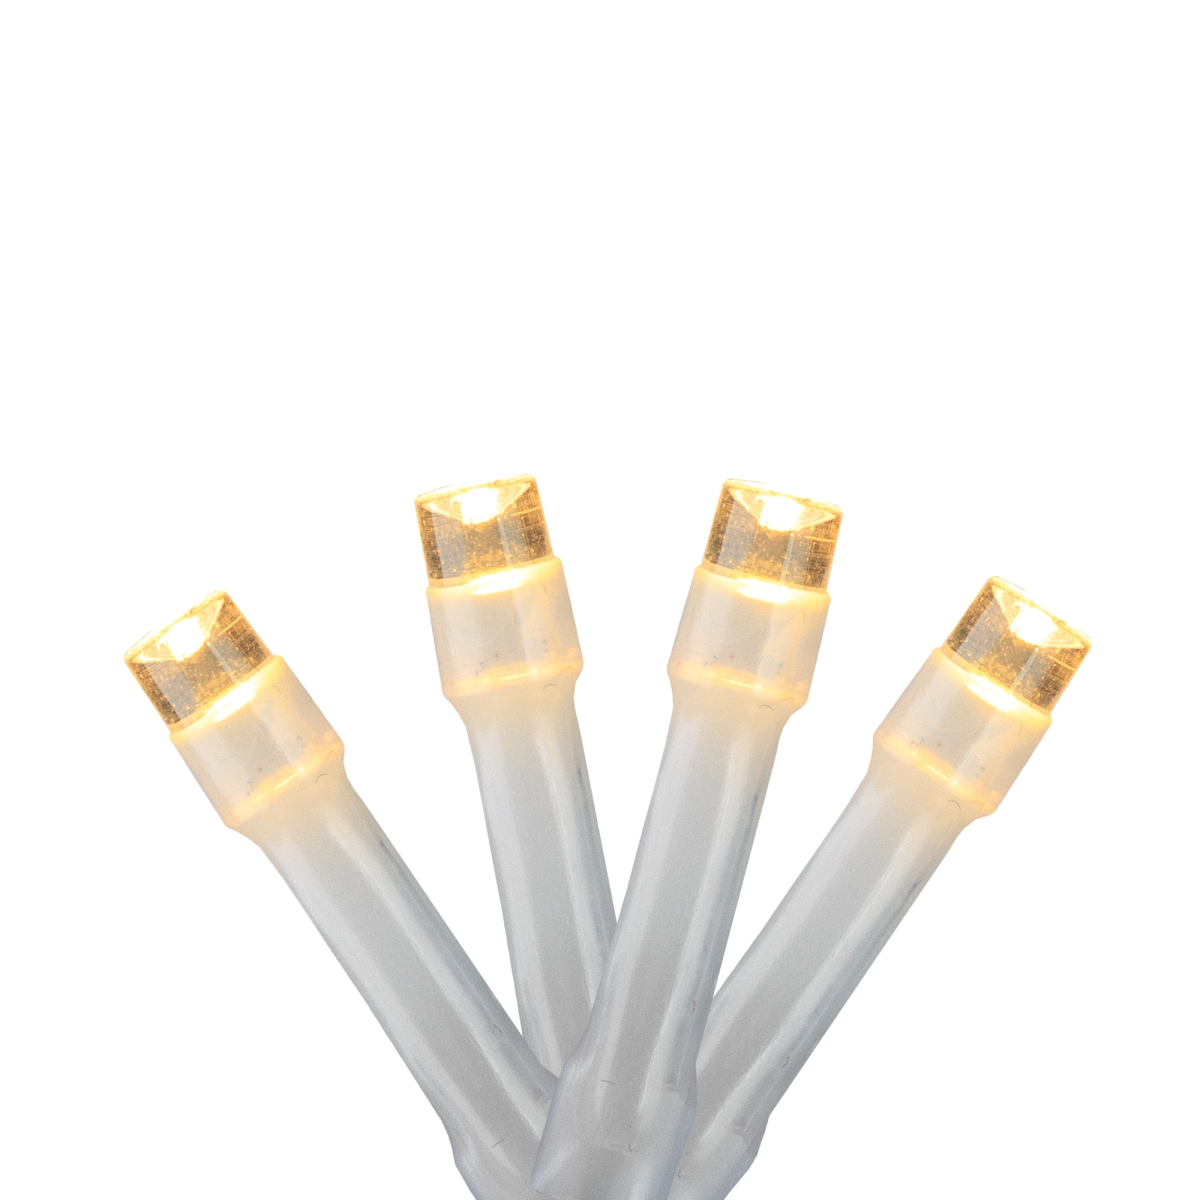 Picture of Brite Star 32551254 Warm White LED Wide Angle Christmas Lights - 4 in. Spacing - White Wire - Set of 20